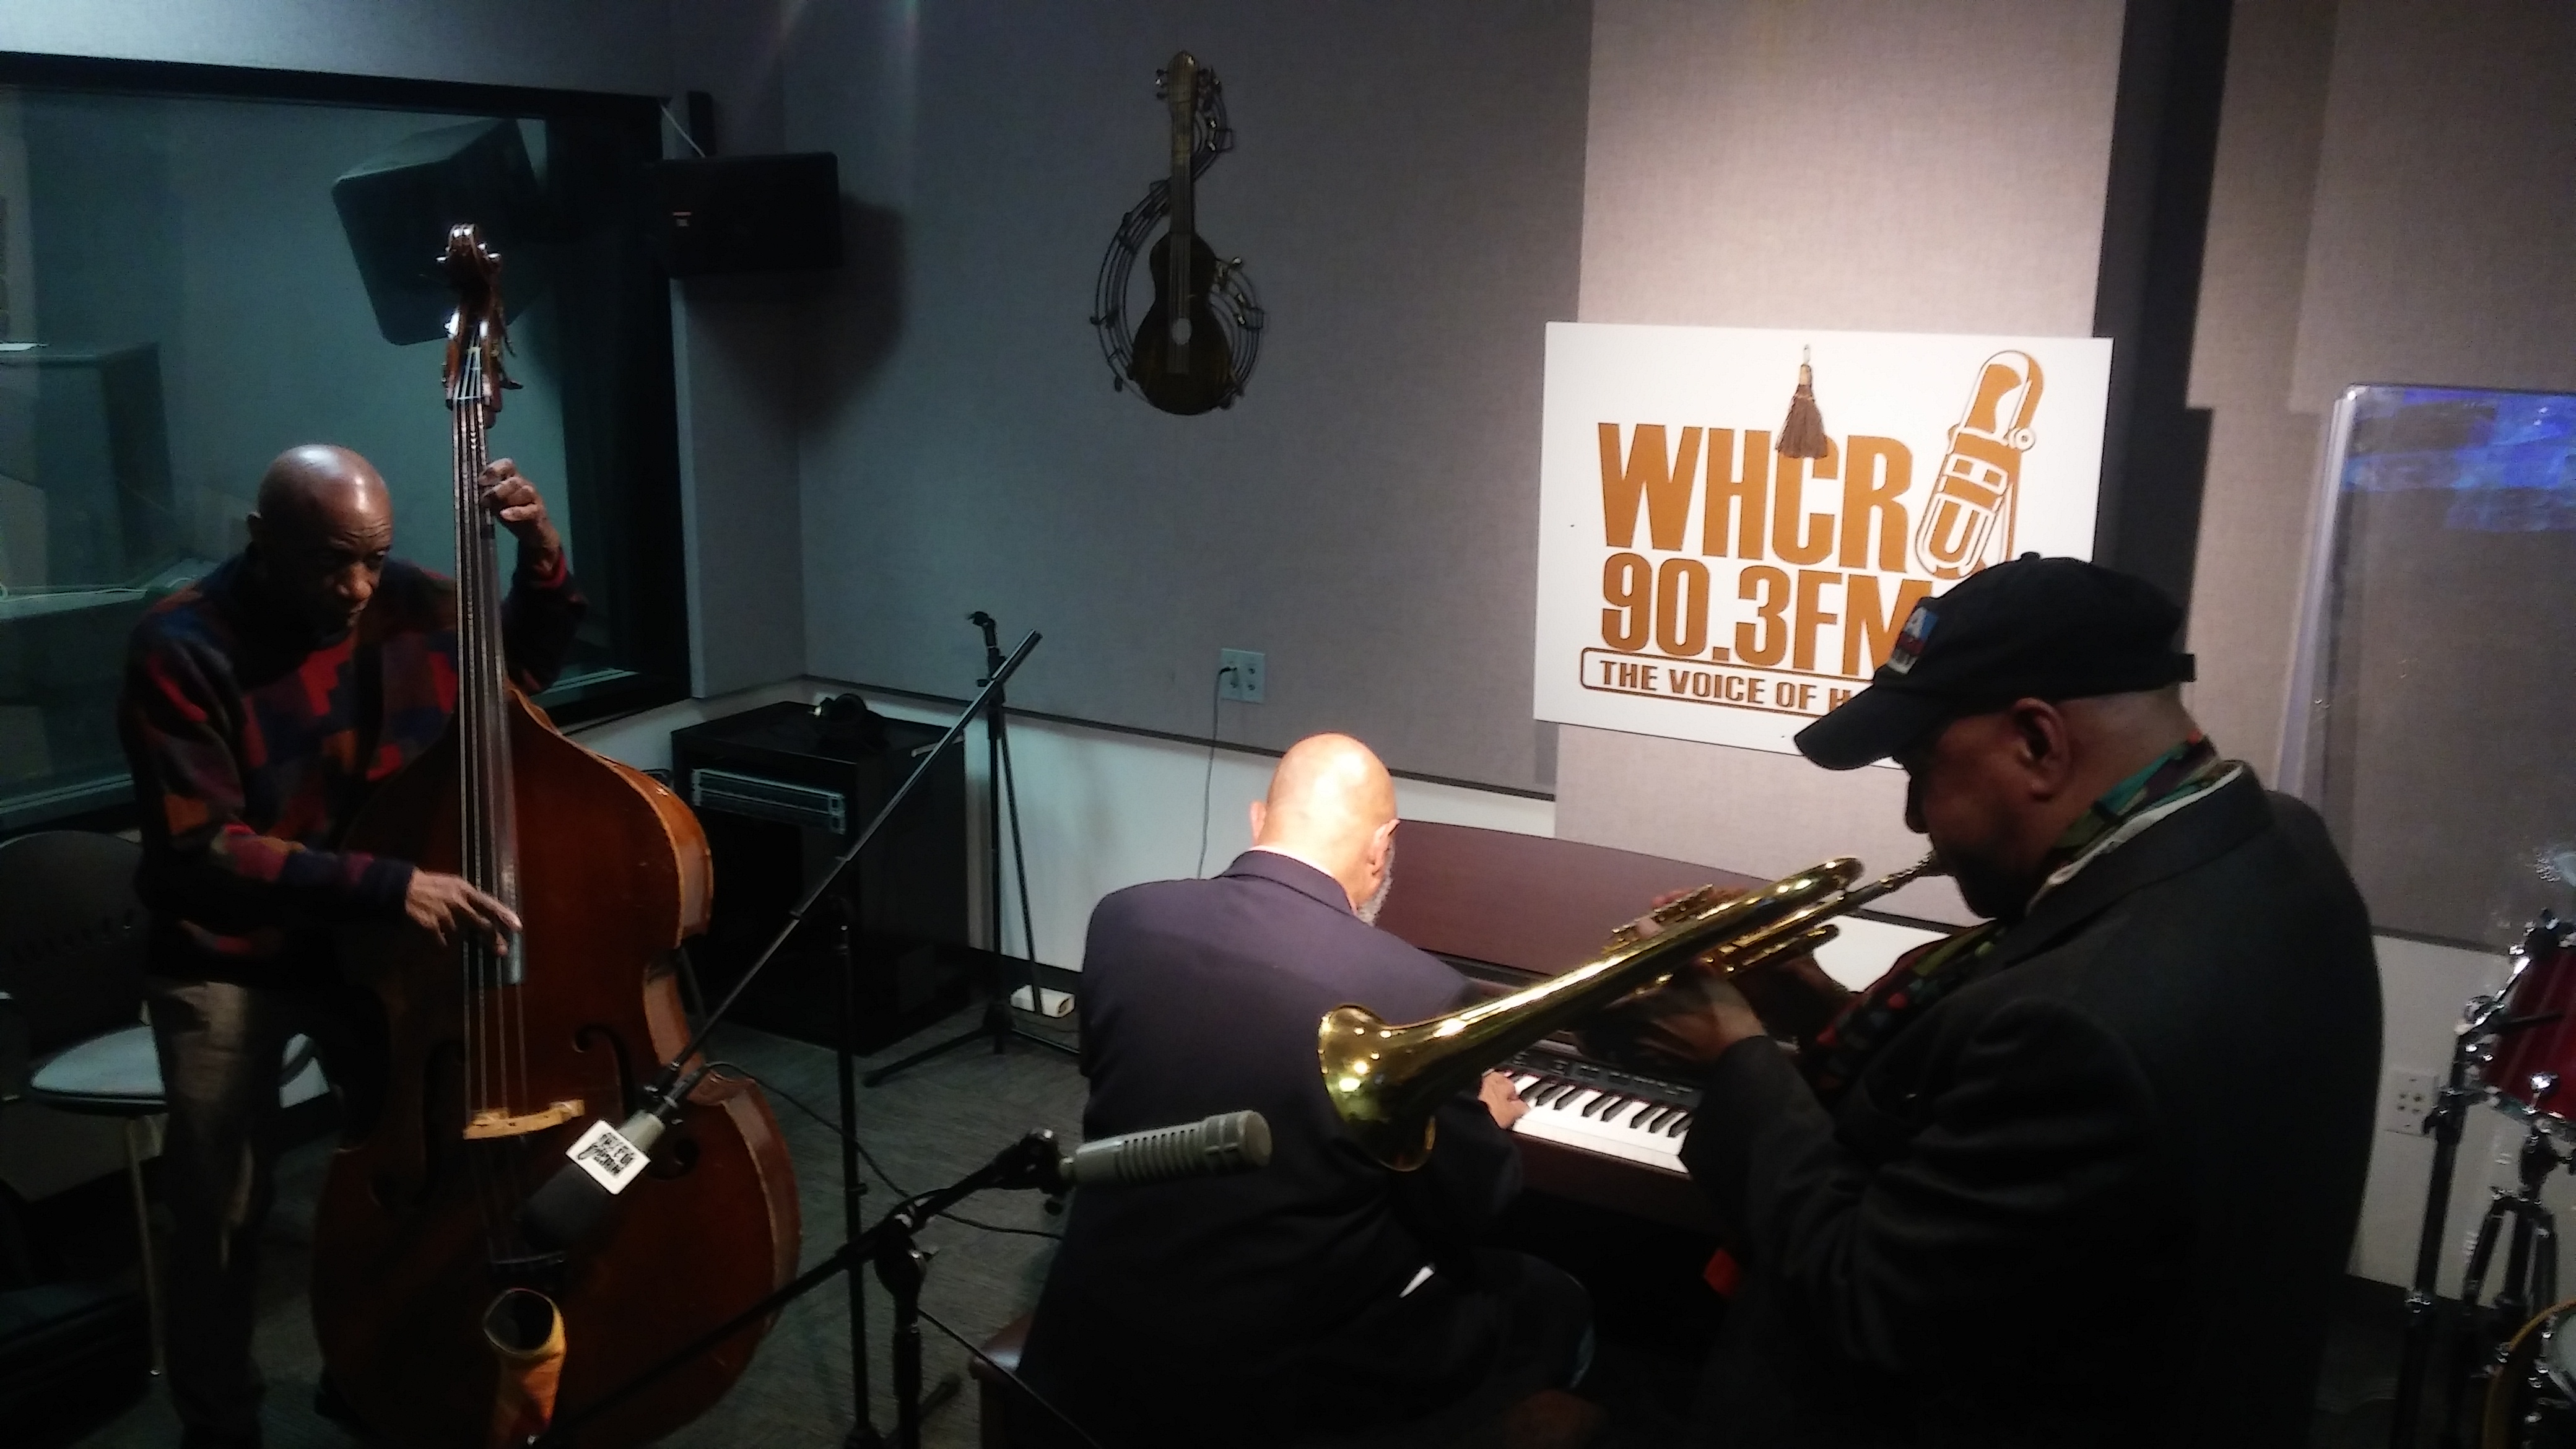 NEA Jazz Masters Breakfast at 90.3FM/NY WHCR - Two people playing musical instruments